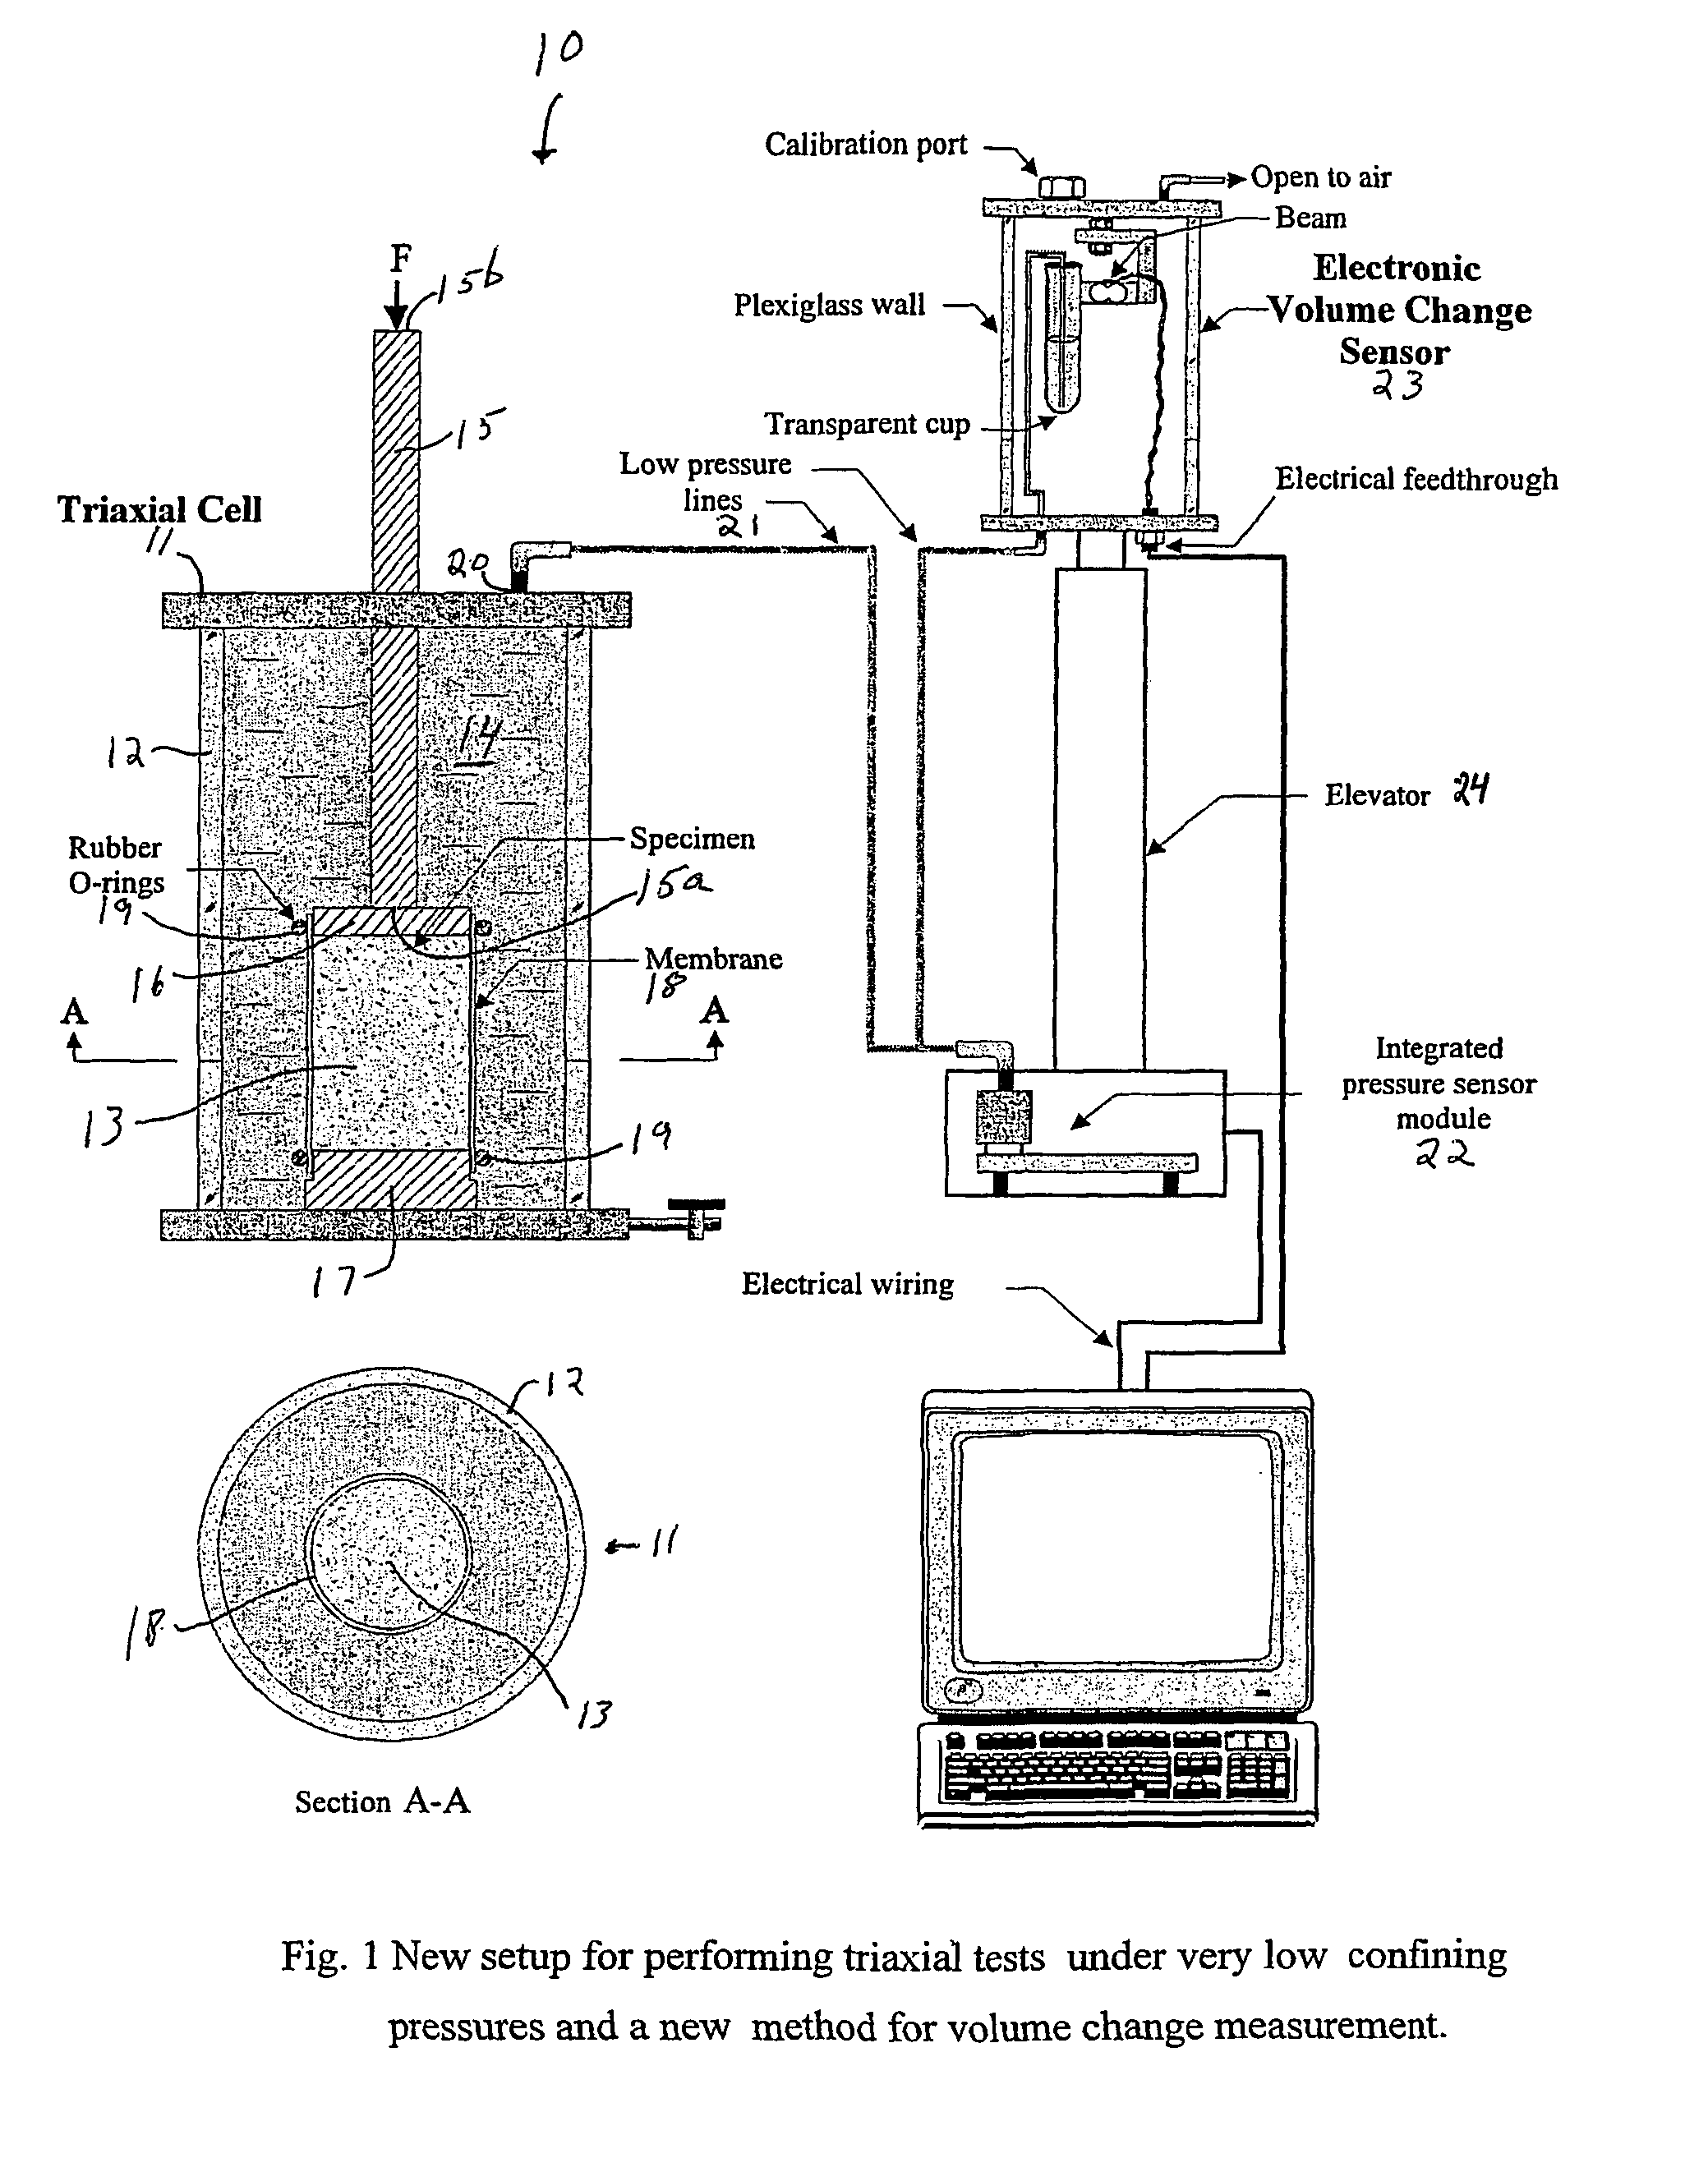 Enhanced triaxial tester with volume change device for measurement of flow properties of dry cohesive particulate systems under low confining pressures